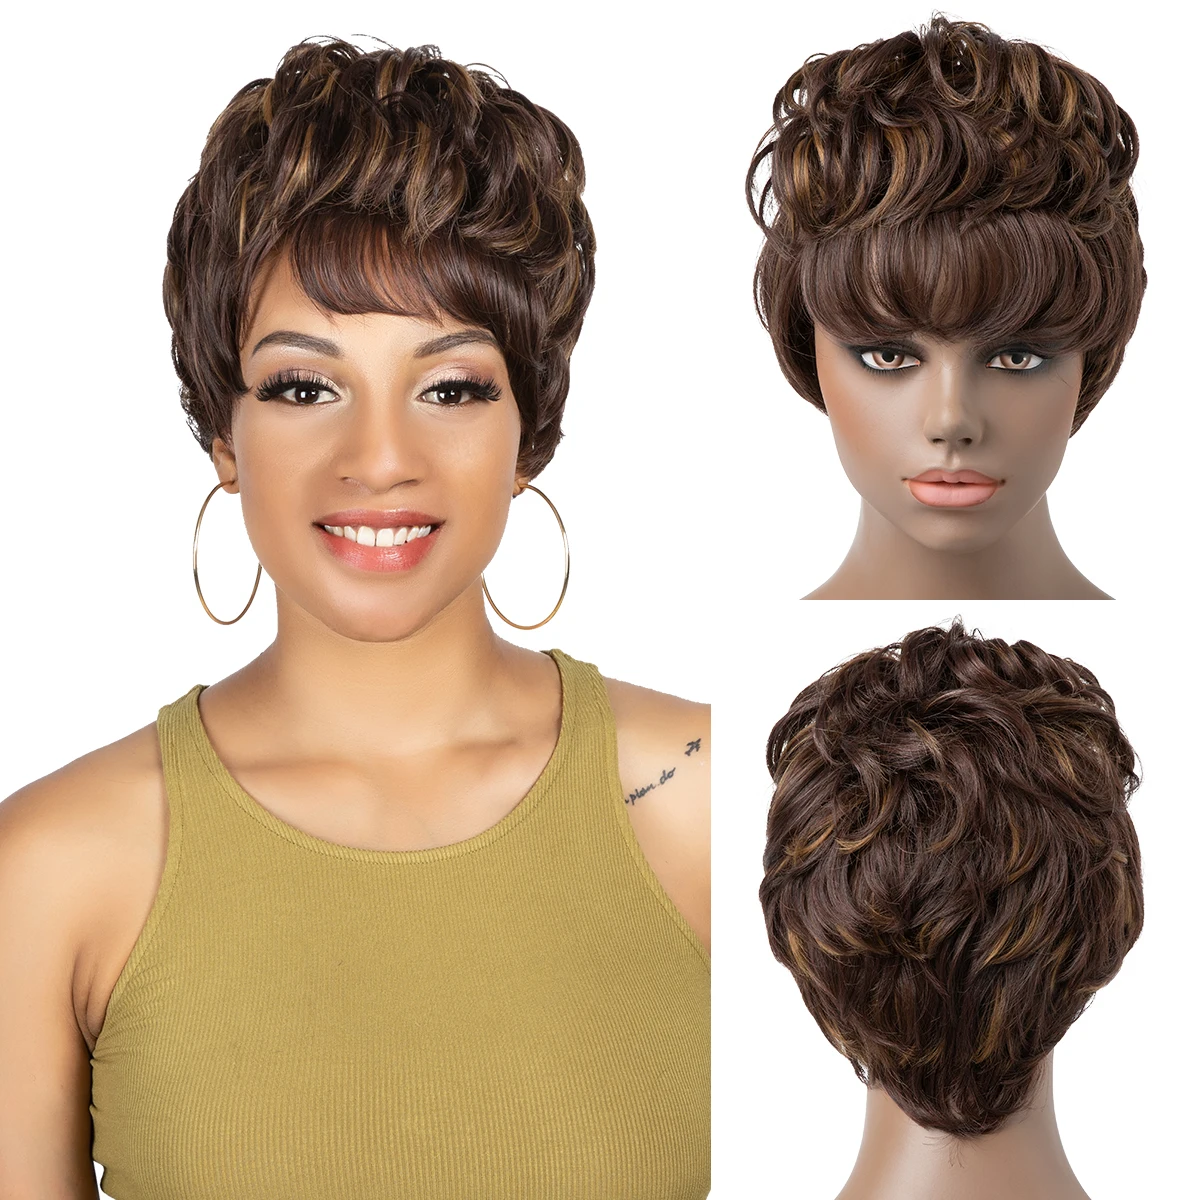 

Short Drag Queen Curly Pixie Cut Wig Afro Highlight Layered Women's Natural Wigs Synthetic African With Bang For Black Women